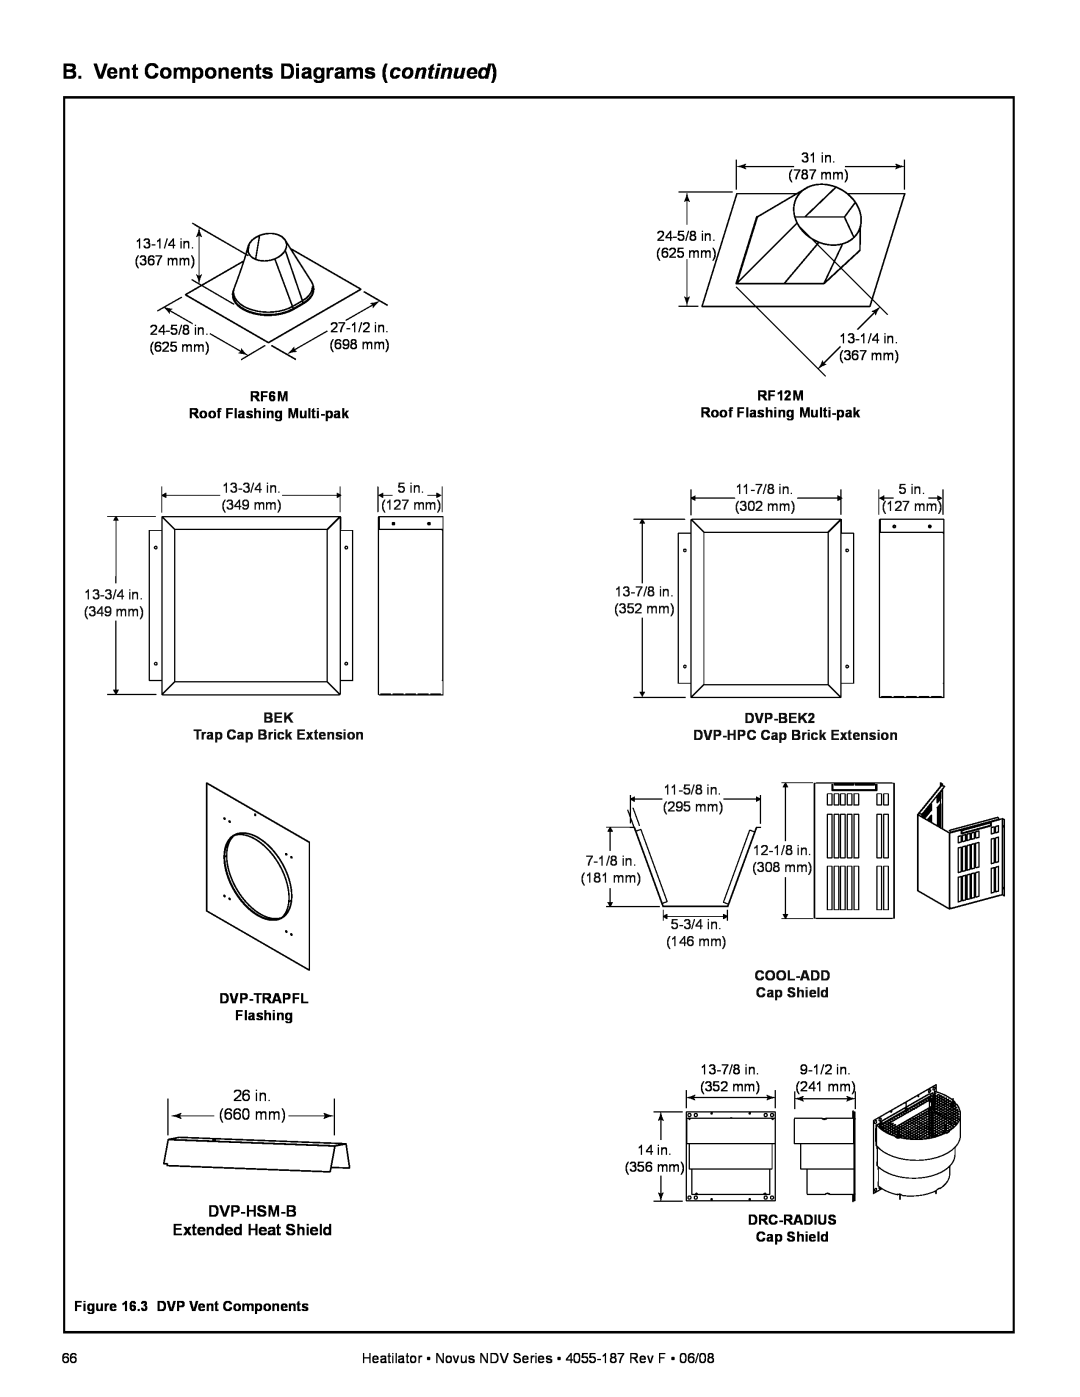 Hearth and Home Technologies NDV3933L B. Vent Components Diagrams continued, Dvp-Hsm-B, Extended Heat Shield, RF6M, RF12M 